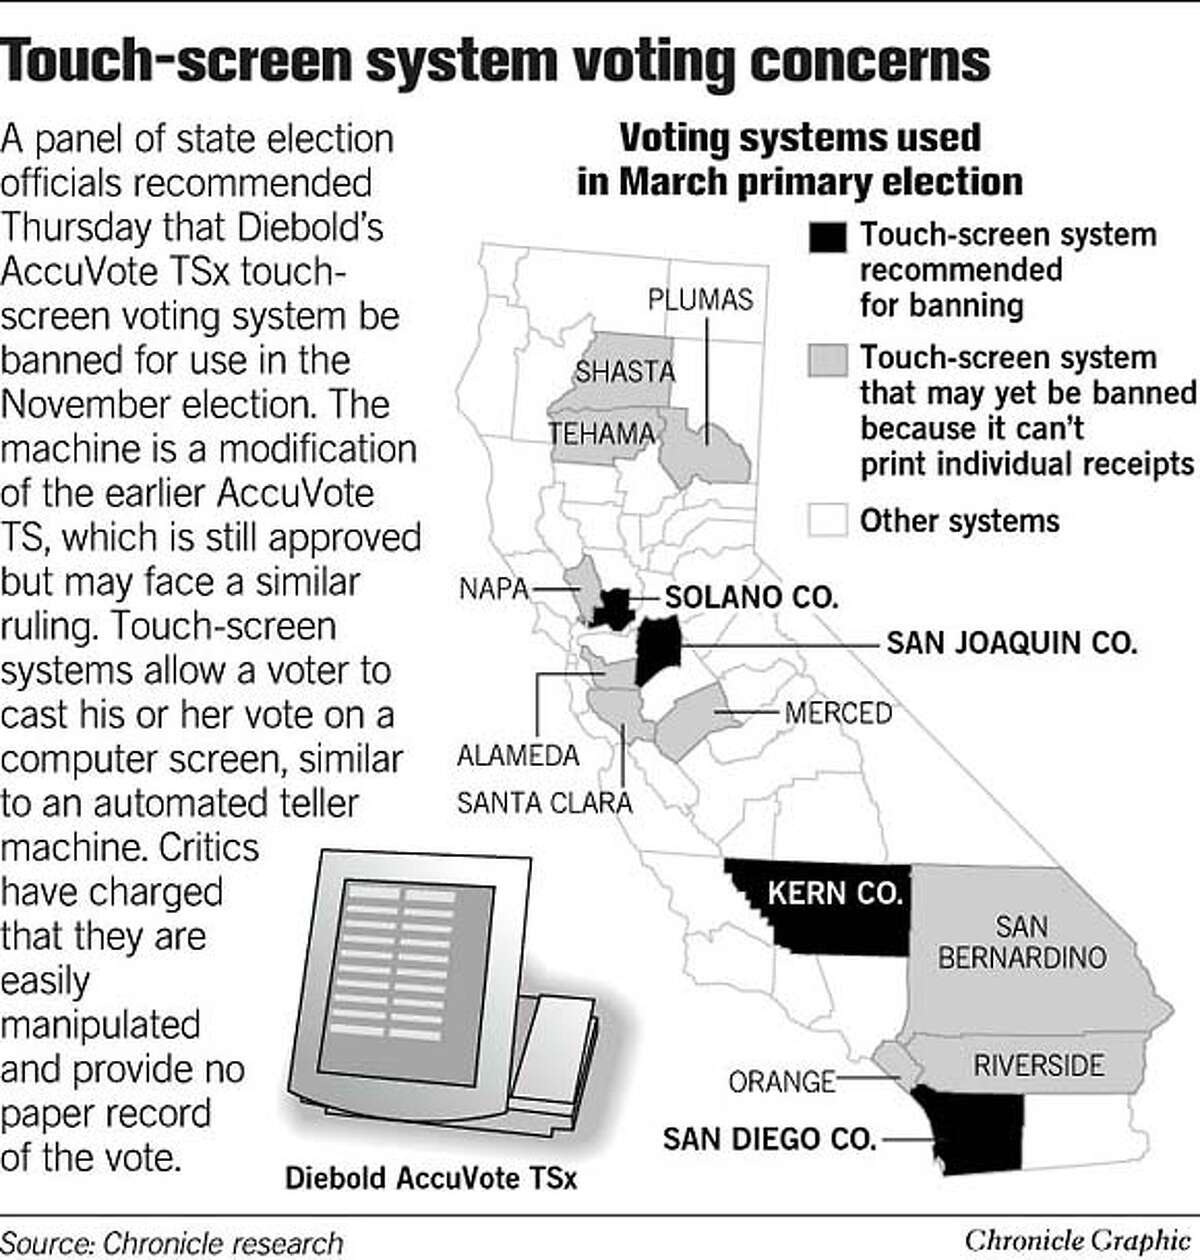 Touch-screen system voting concerns. Chronicle Graphic